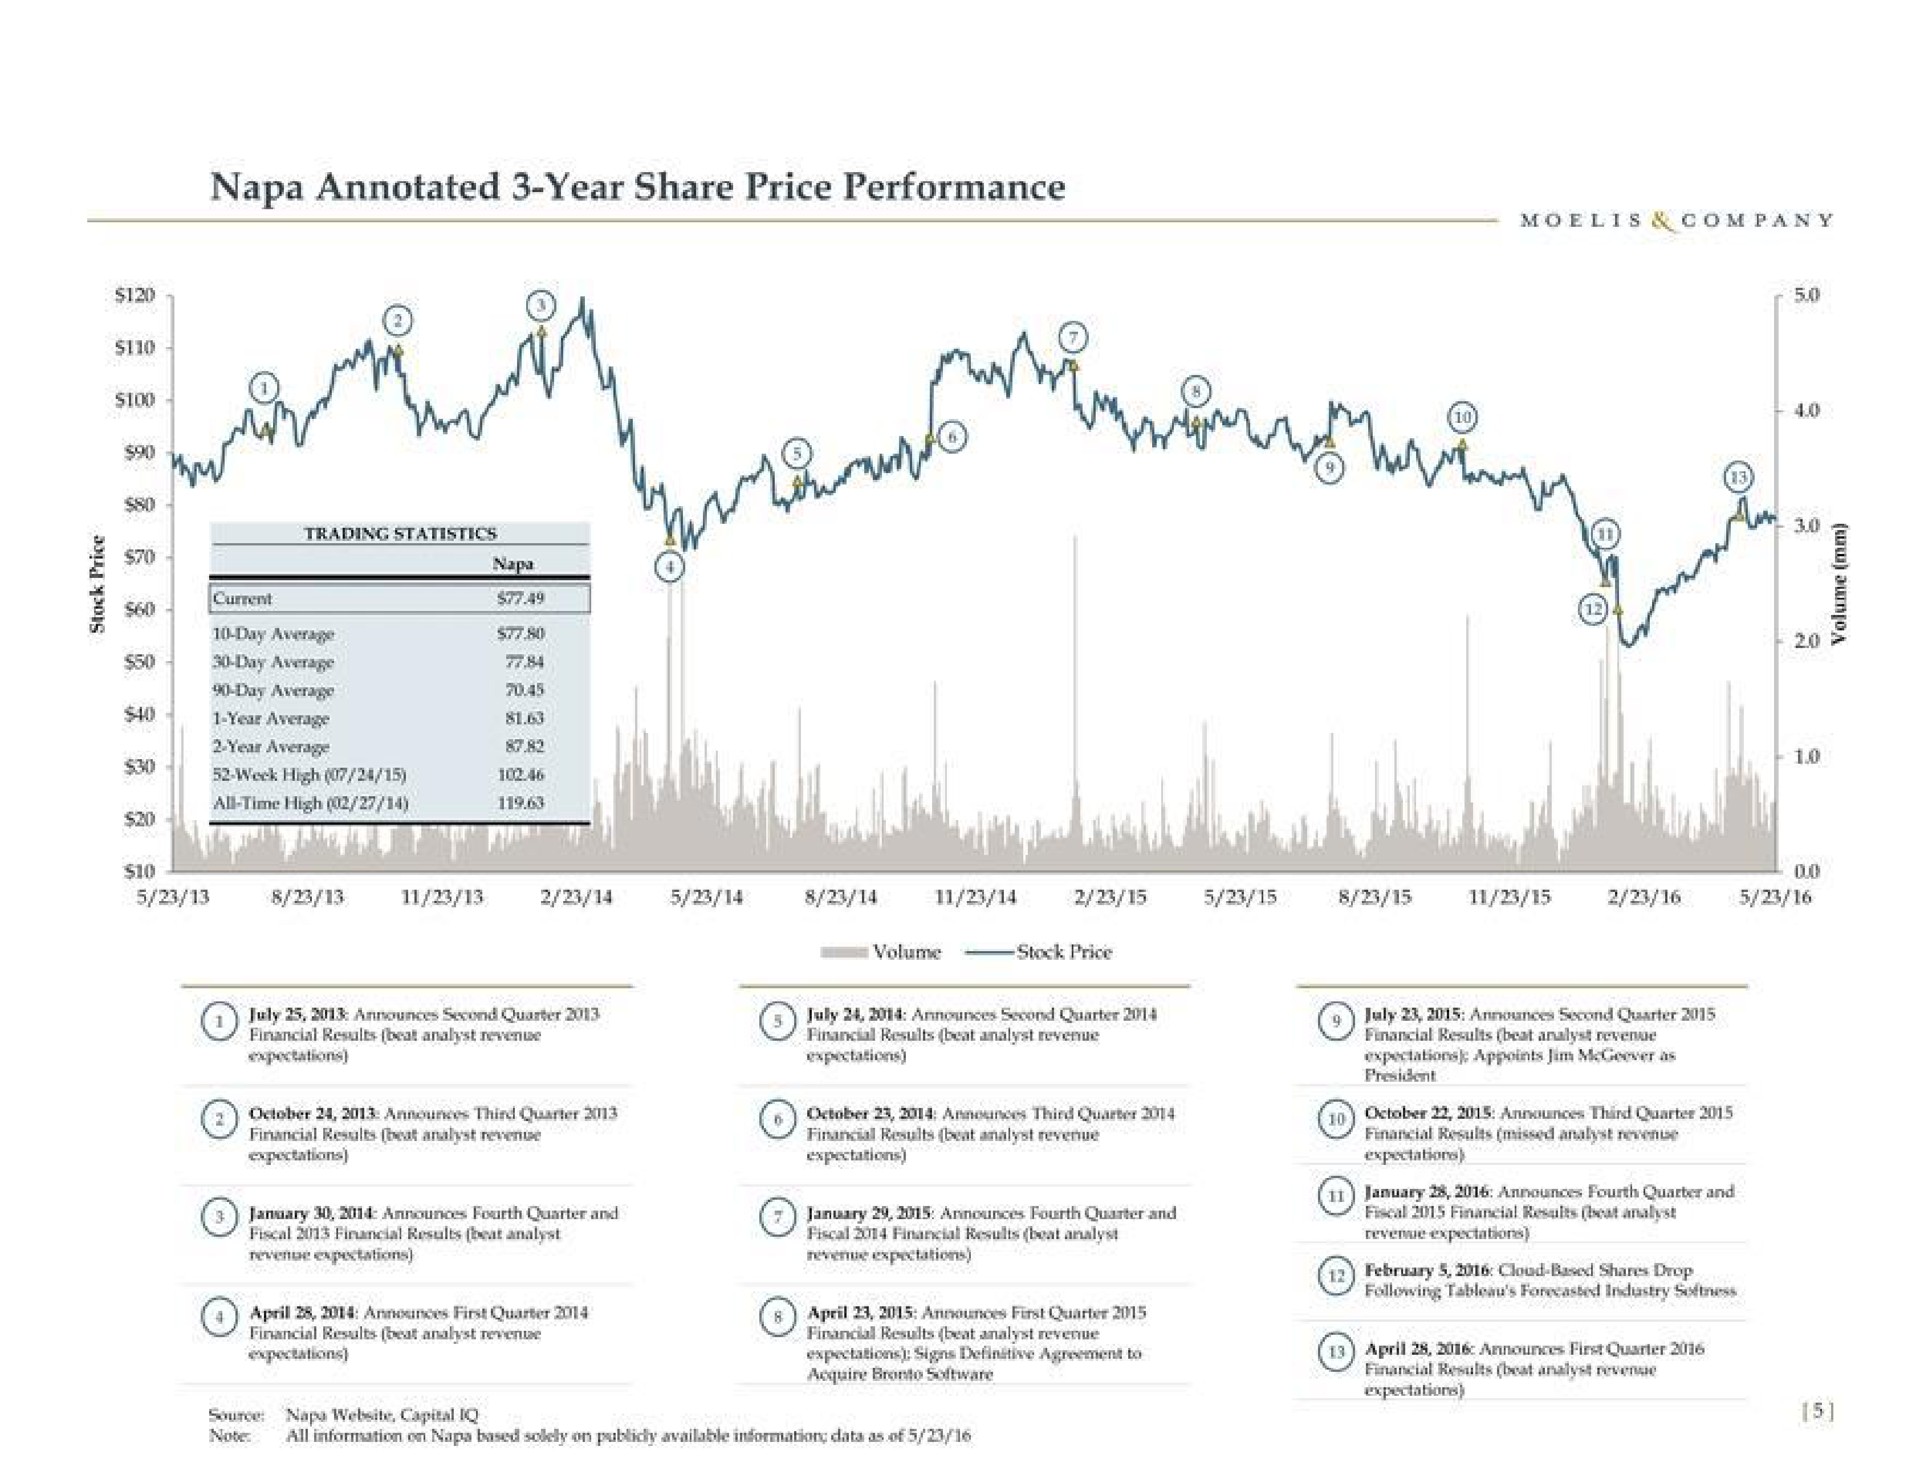 napa annotated year share price performance on err pope mes | Moelis & Company